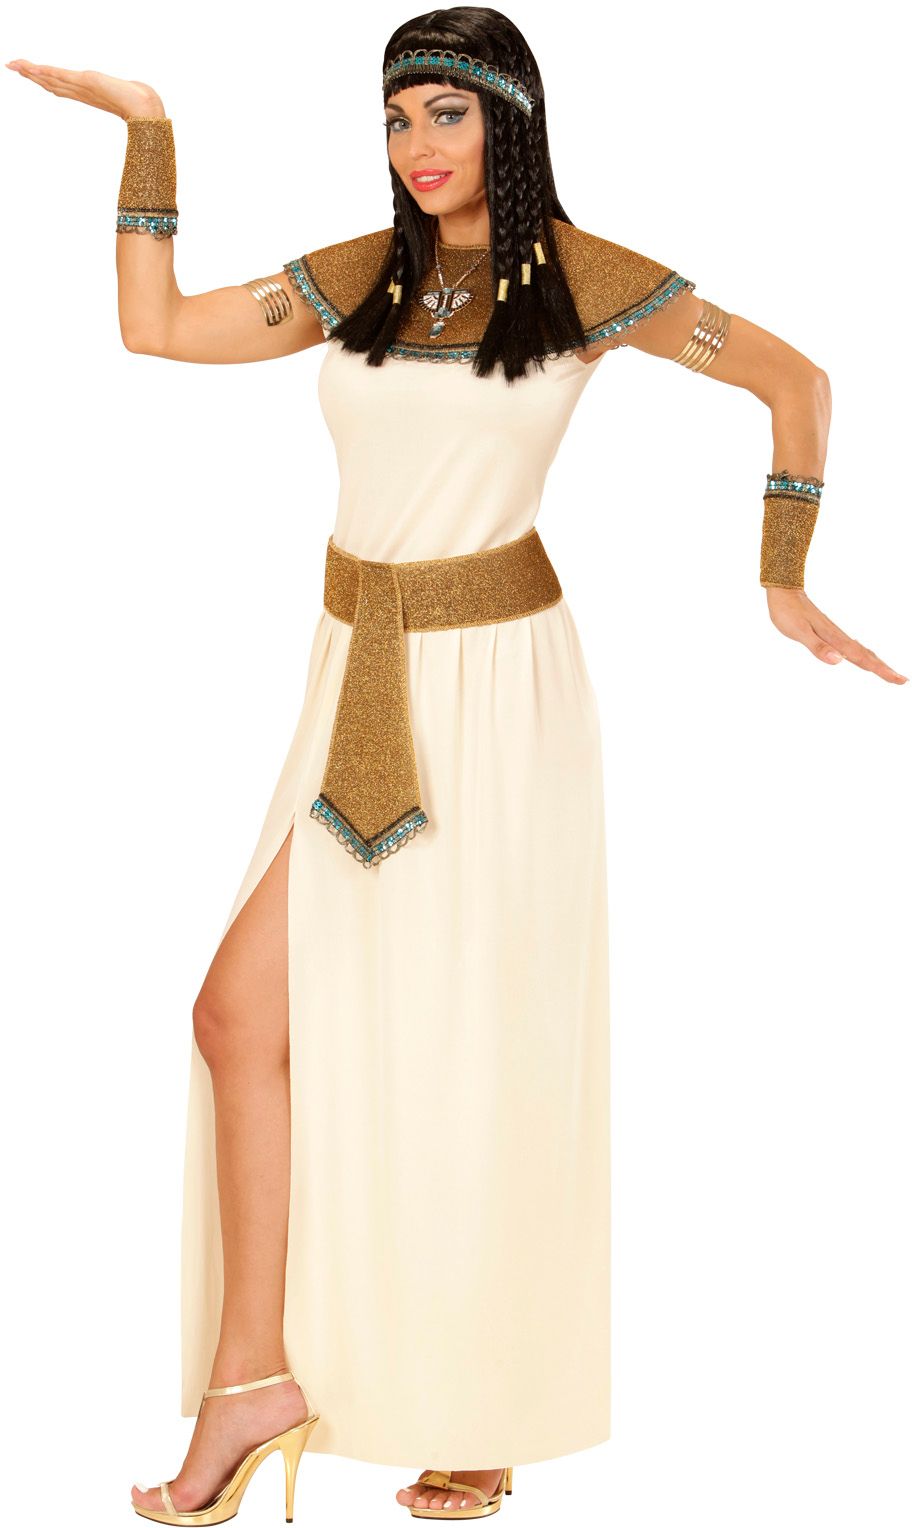 Cleopatra outfit